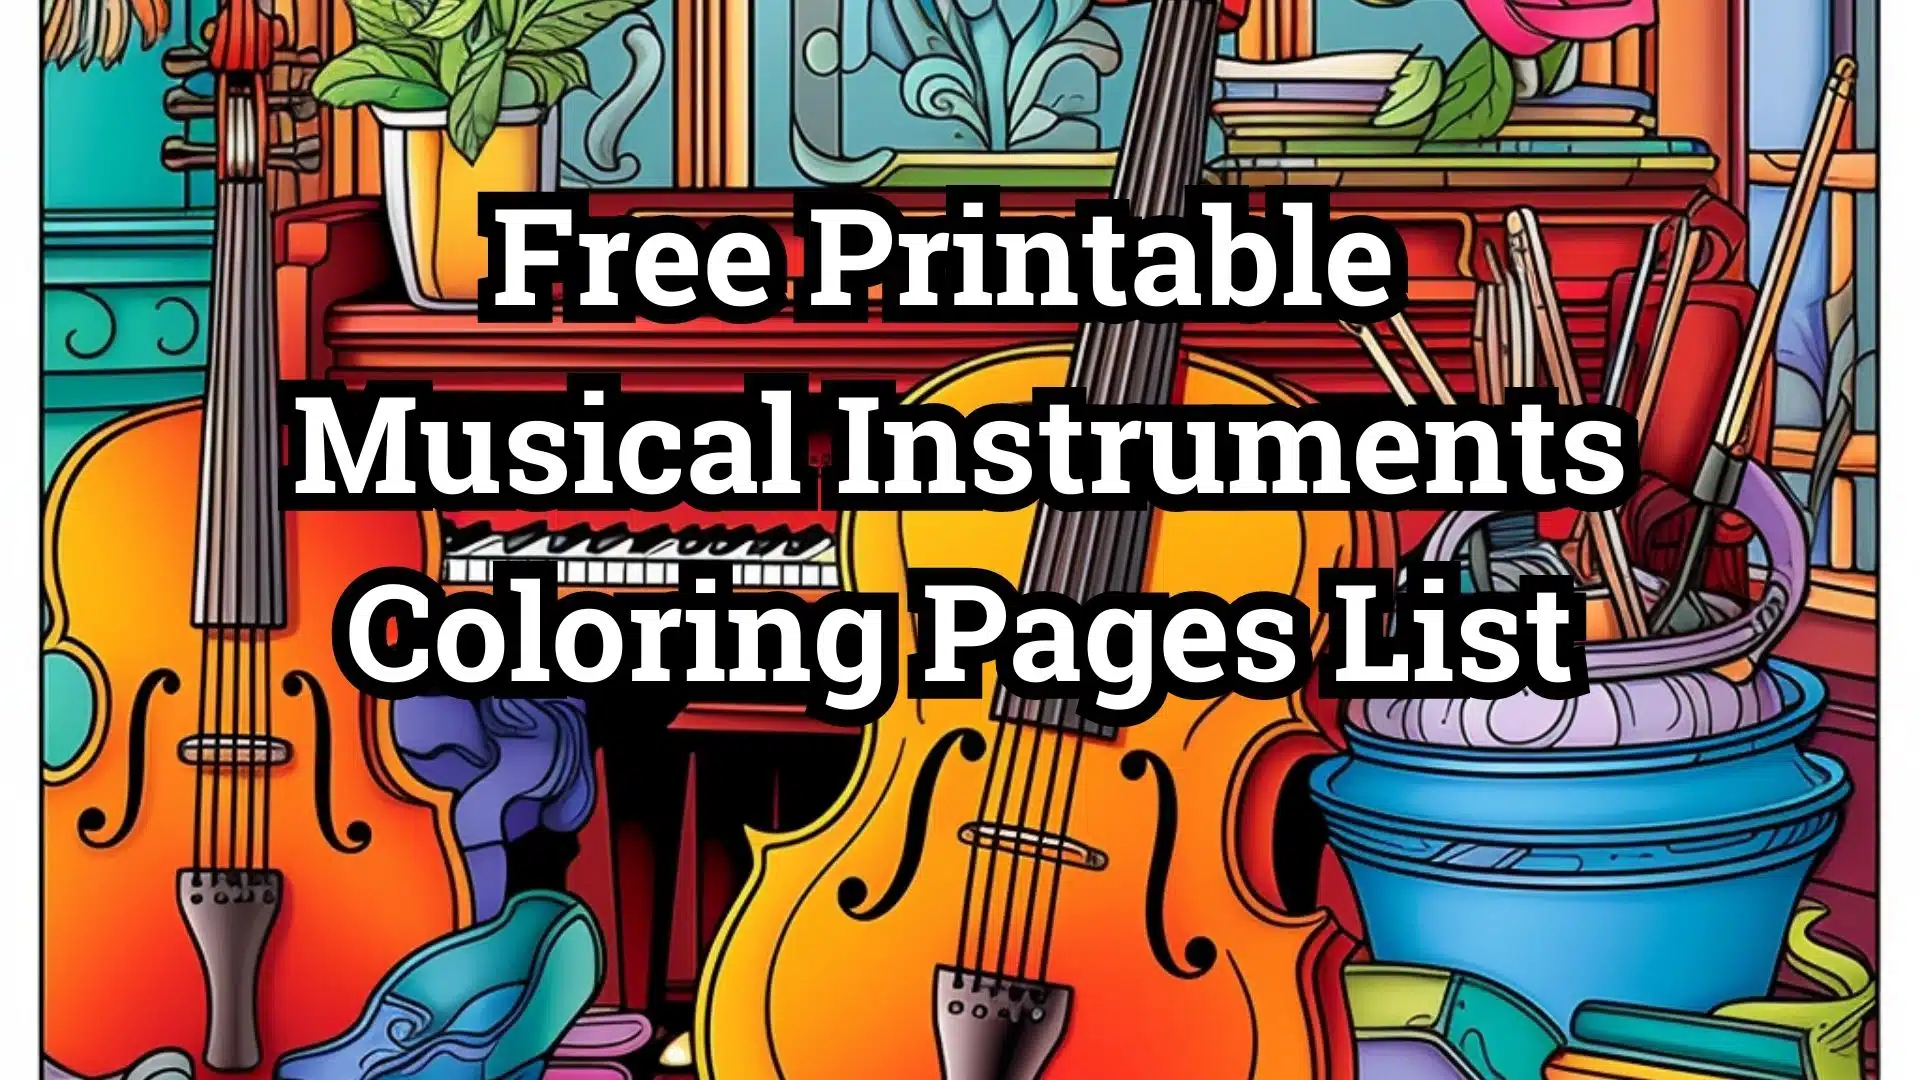 Free Printable Musical Instruments Coloring Pages List